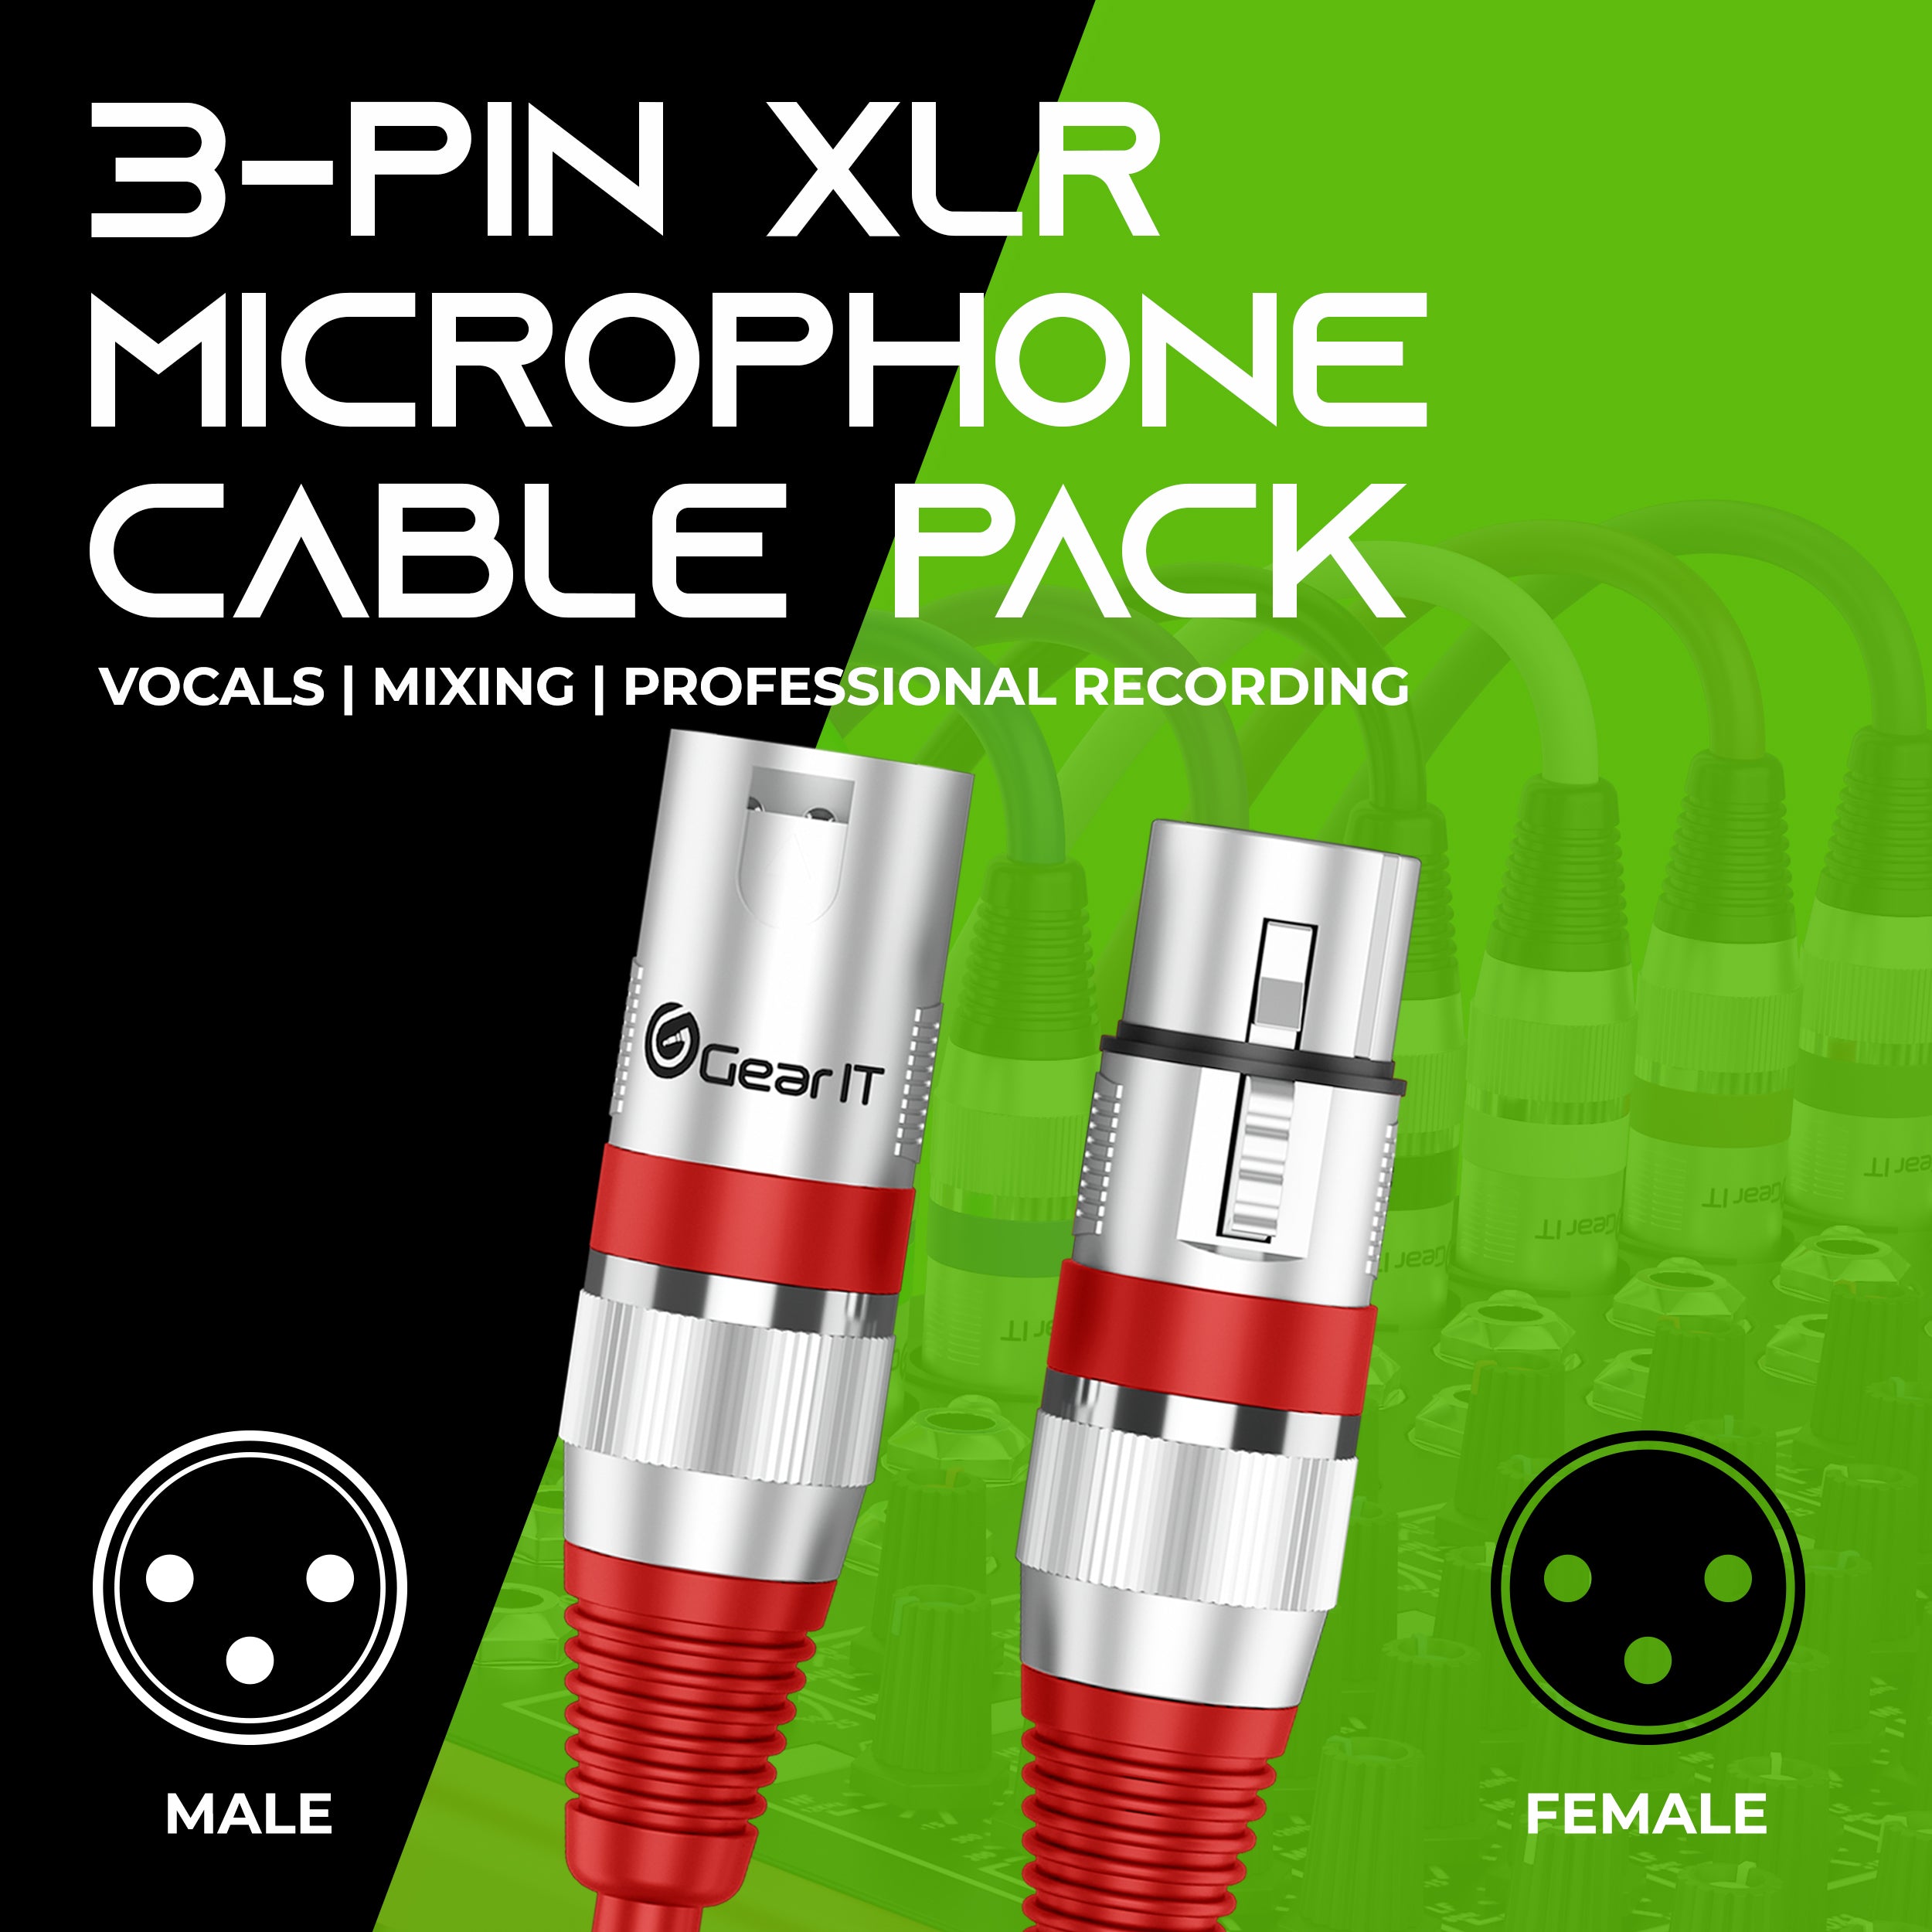 GearIT XLR to XLR Microphone Cable (6 Feet, 10 Pack) XLR Male to Female Mic  Cable 3-Pin Balanced Shielded XLR Cable for Mic Mixer, Recording Studio,  Podcast - Multi Colored, 6Ft, 10 Pack 